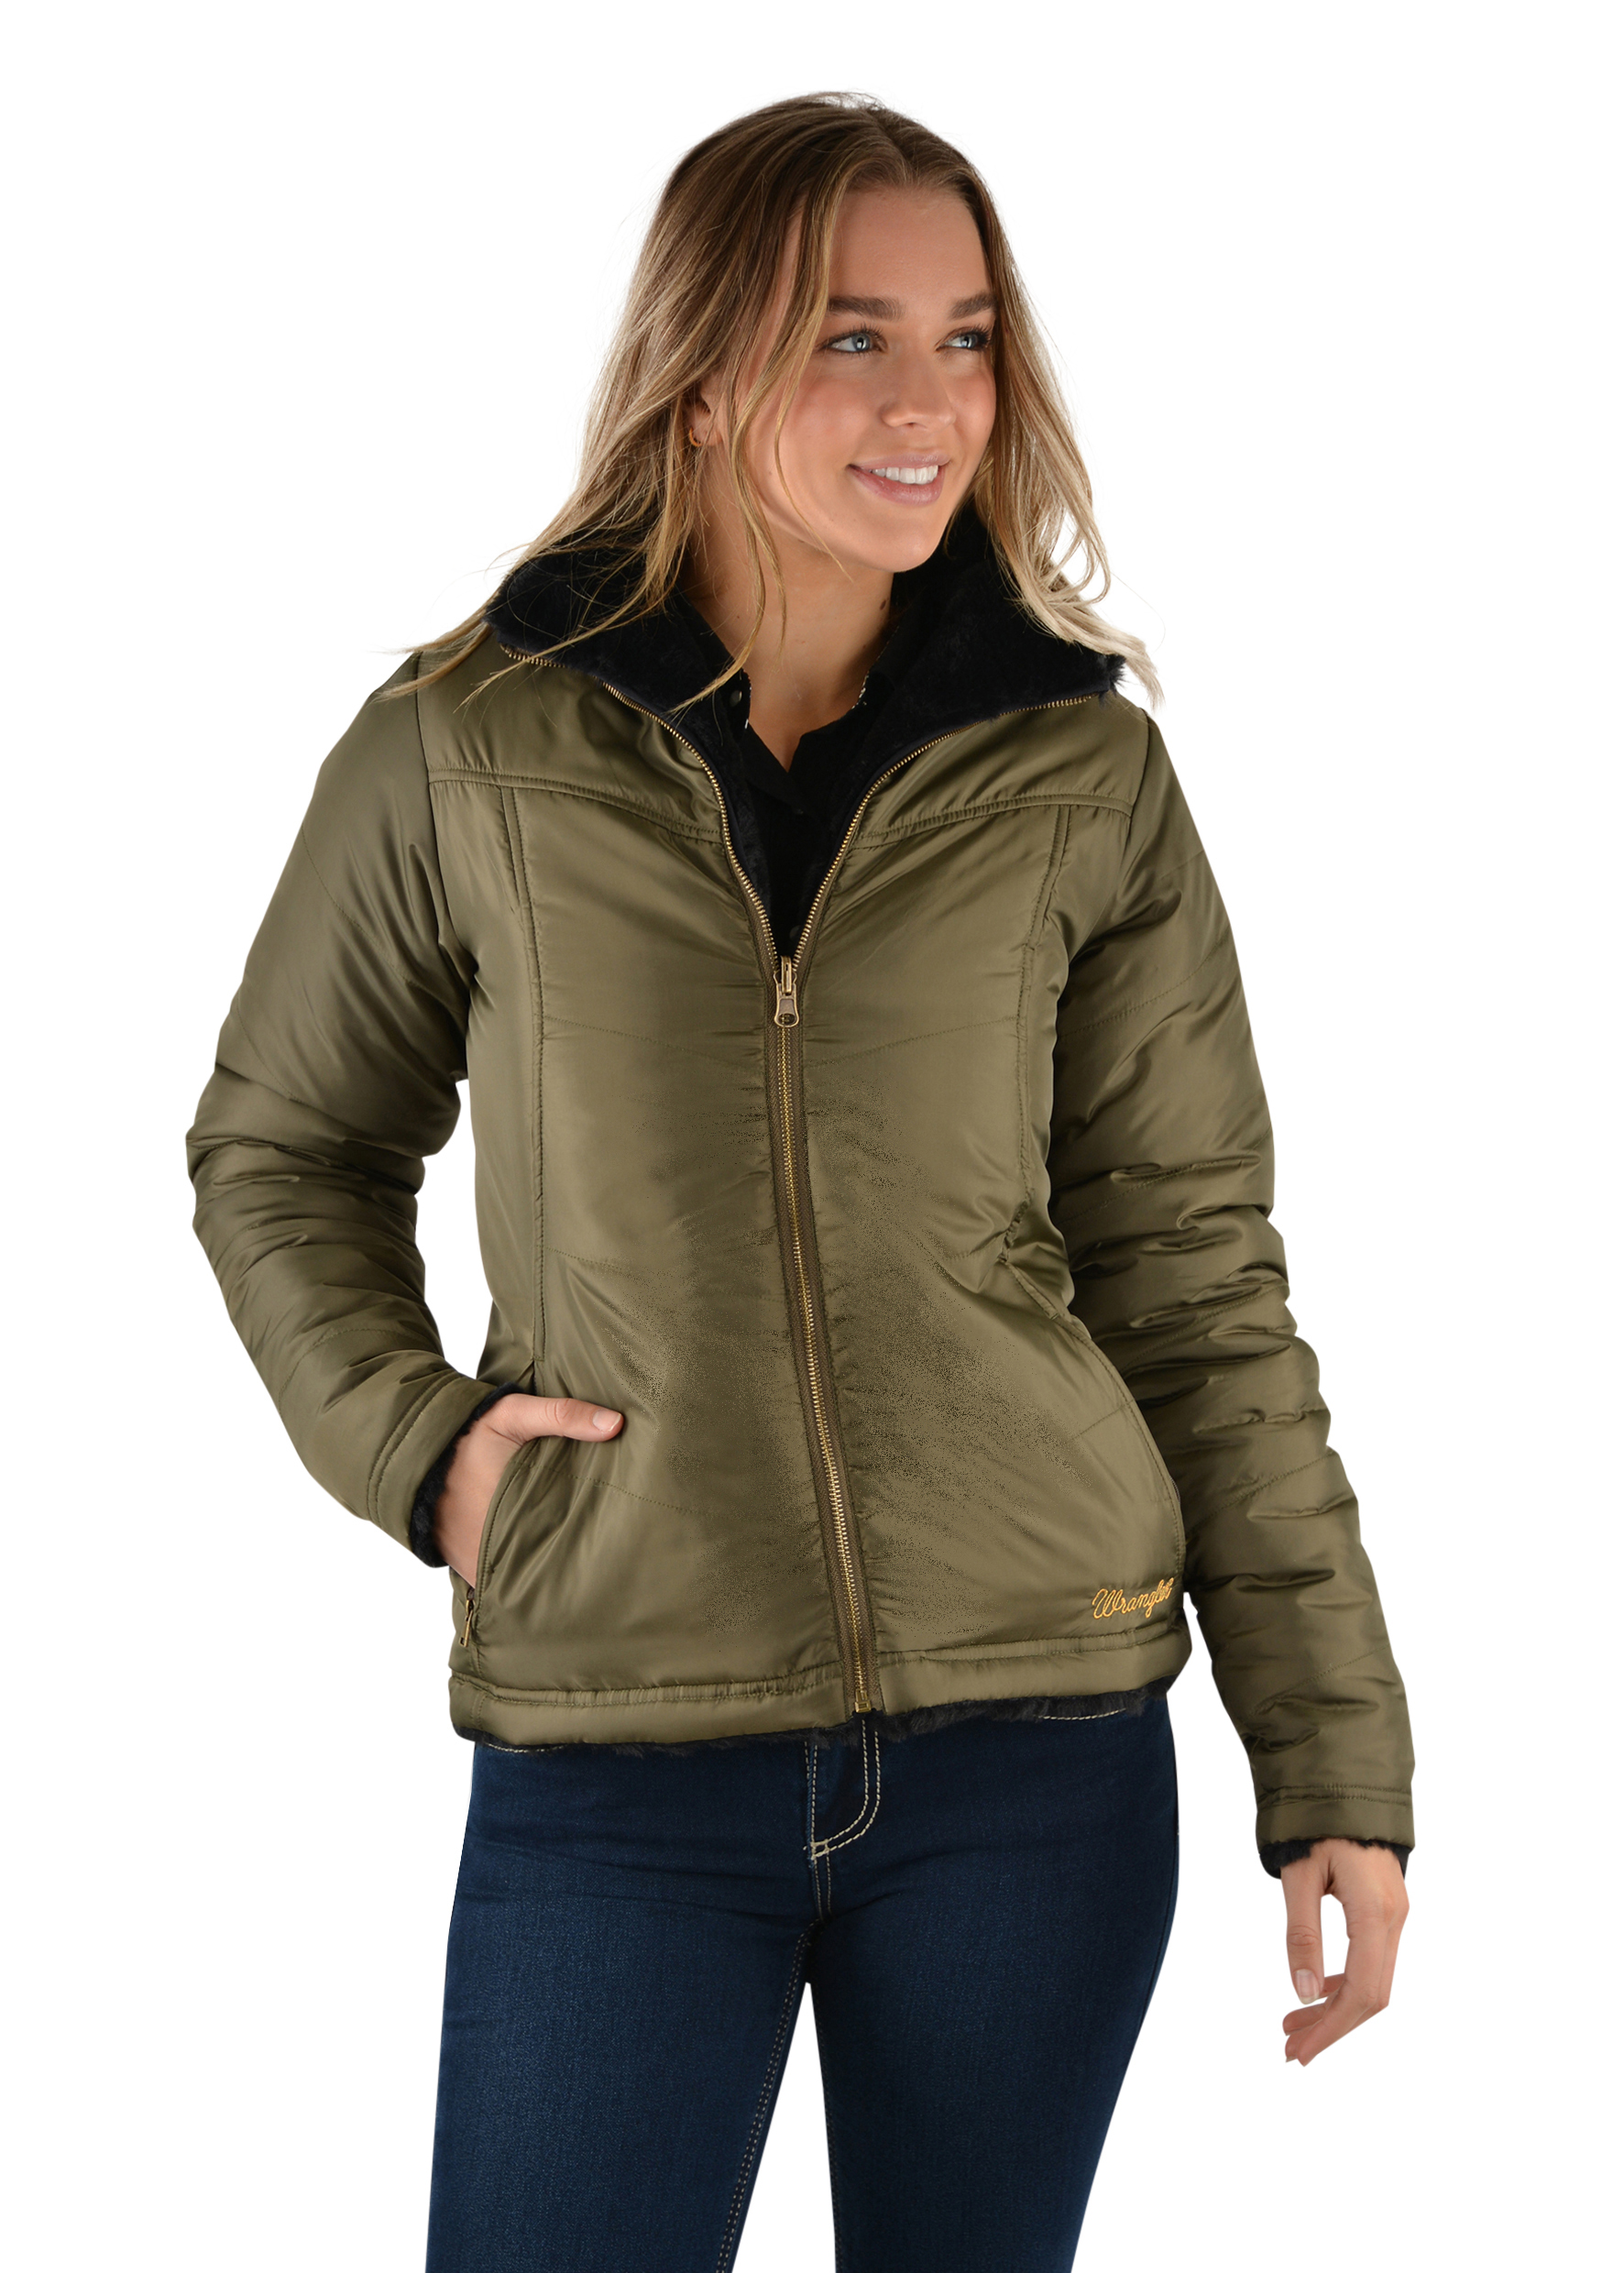 Wrangler Women's Carrier Reversible Jacket - Olive/Black - Donohues, City &  Country Gear